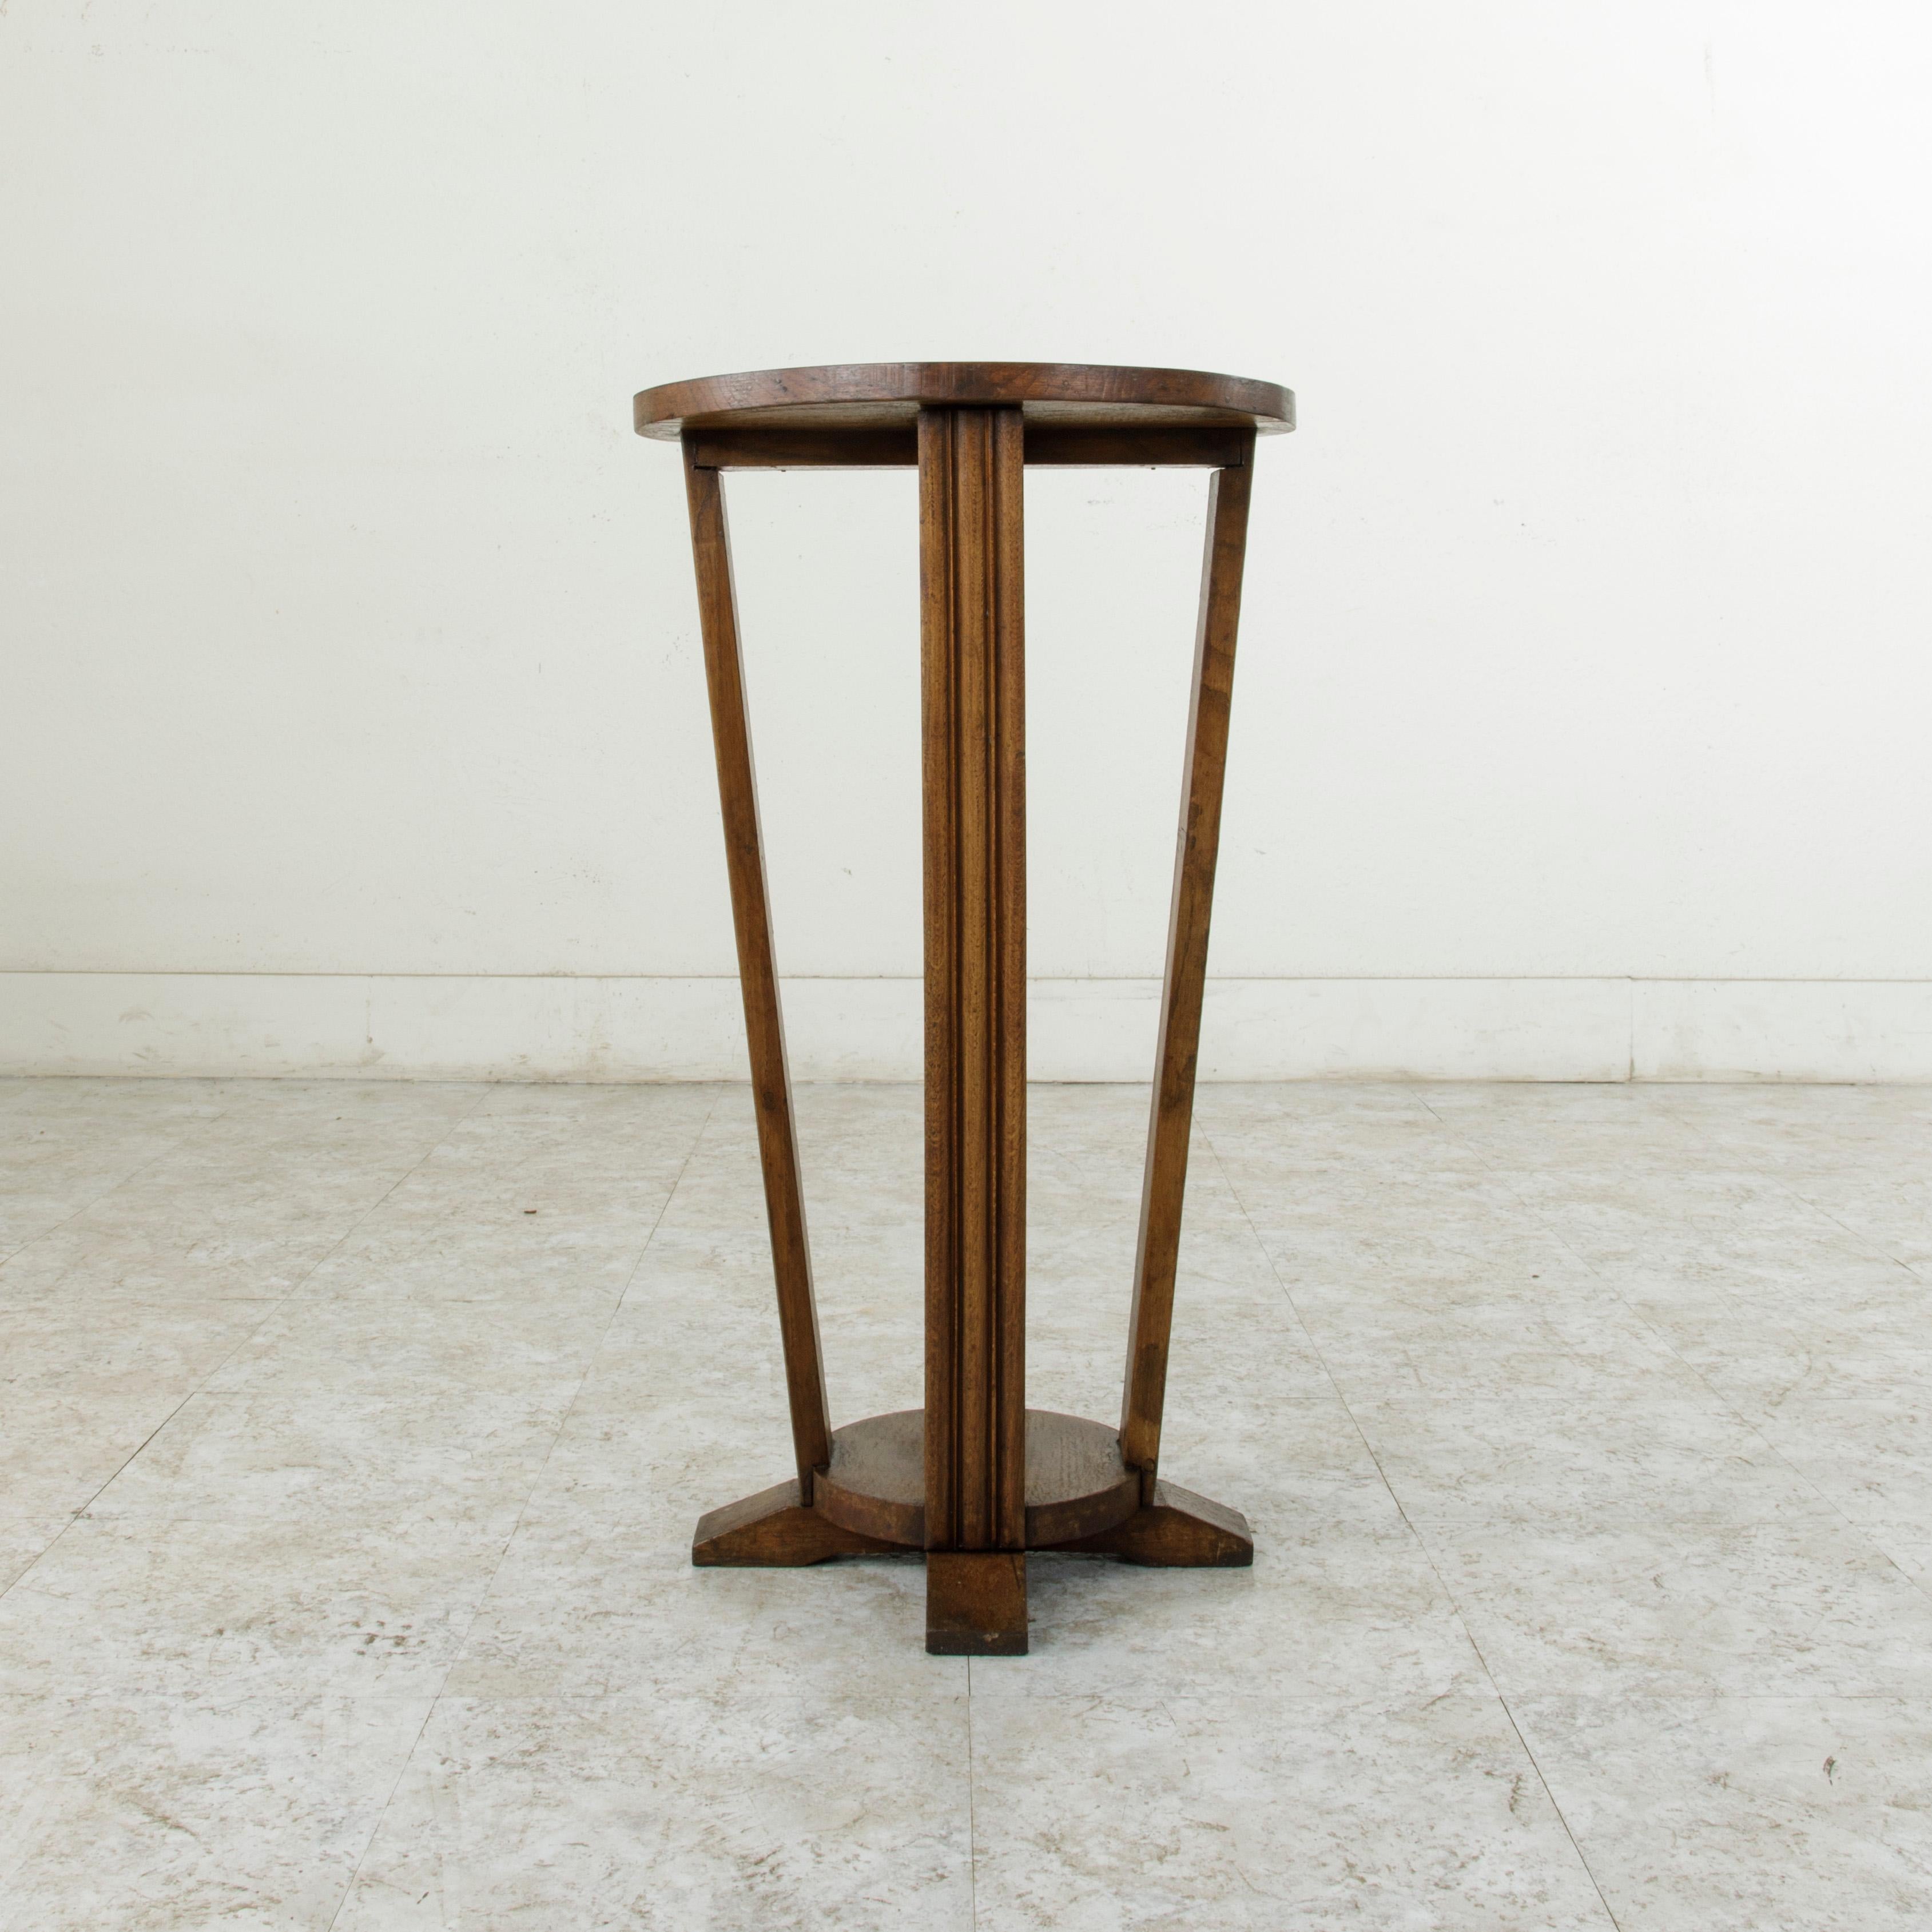 Early 20th Century French Art Deco Period Oak Pedestal, Side Table, Fern Stand 1